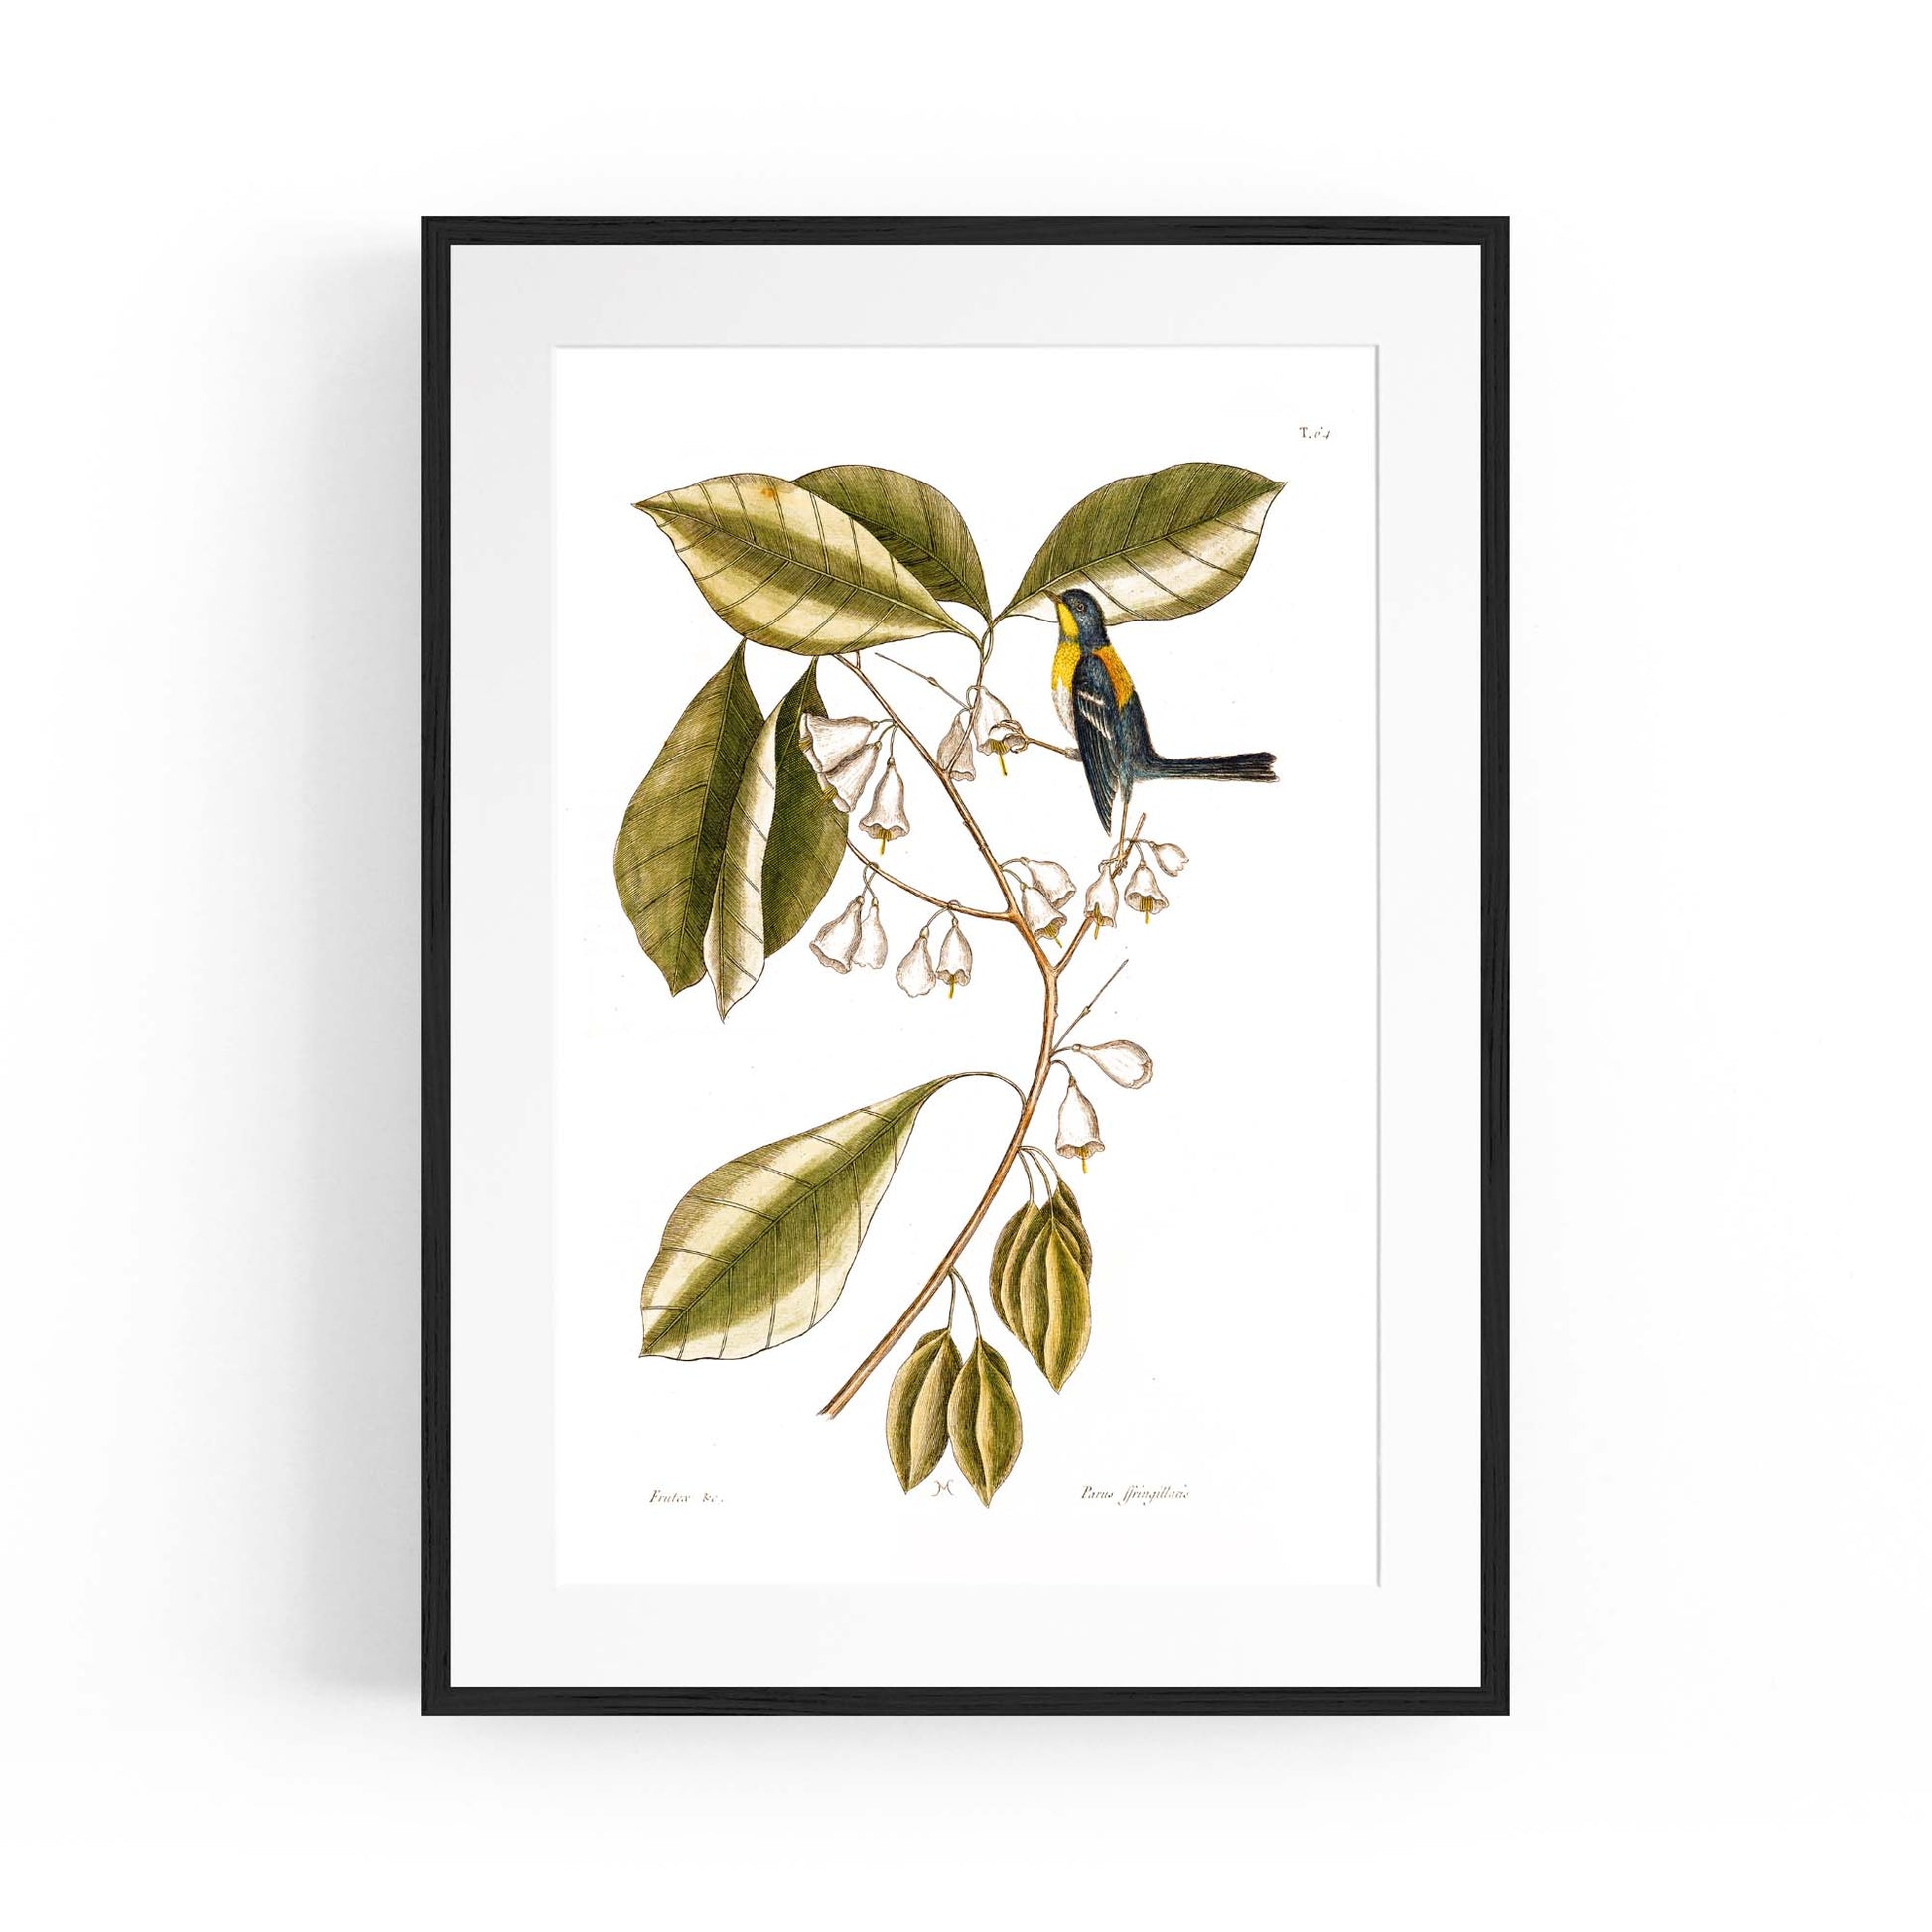 White Flower Vintage Botanical Kitchen Wall Art #1 - The Affordable Art Company